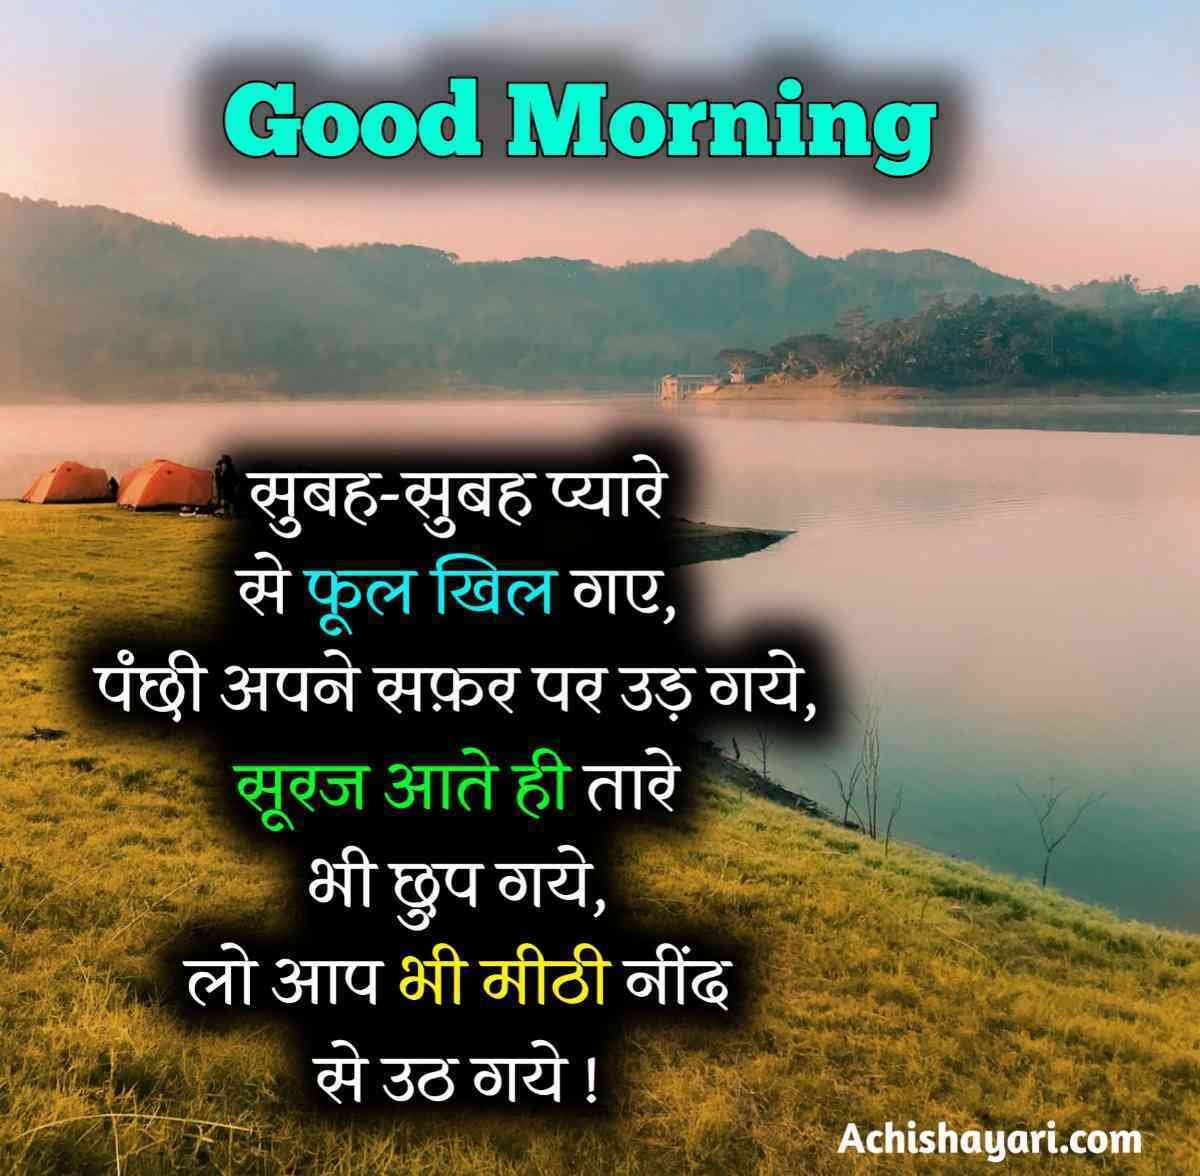 good morning messages images